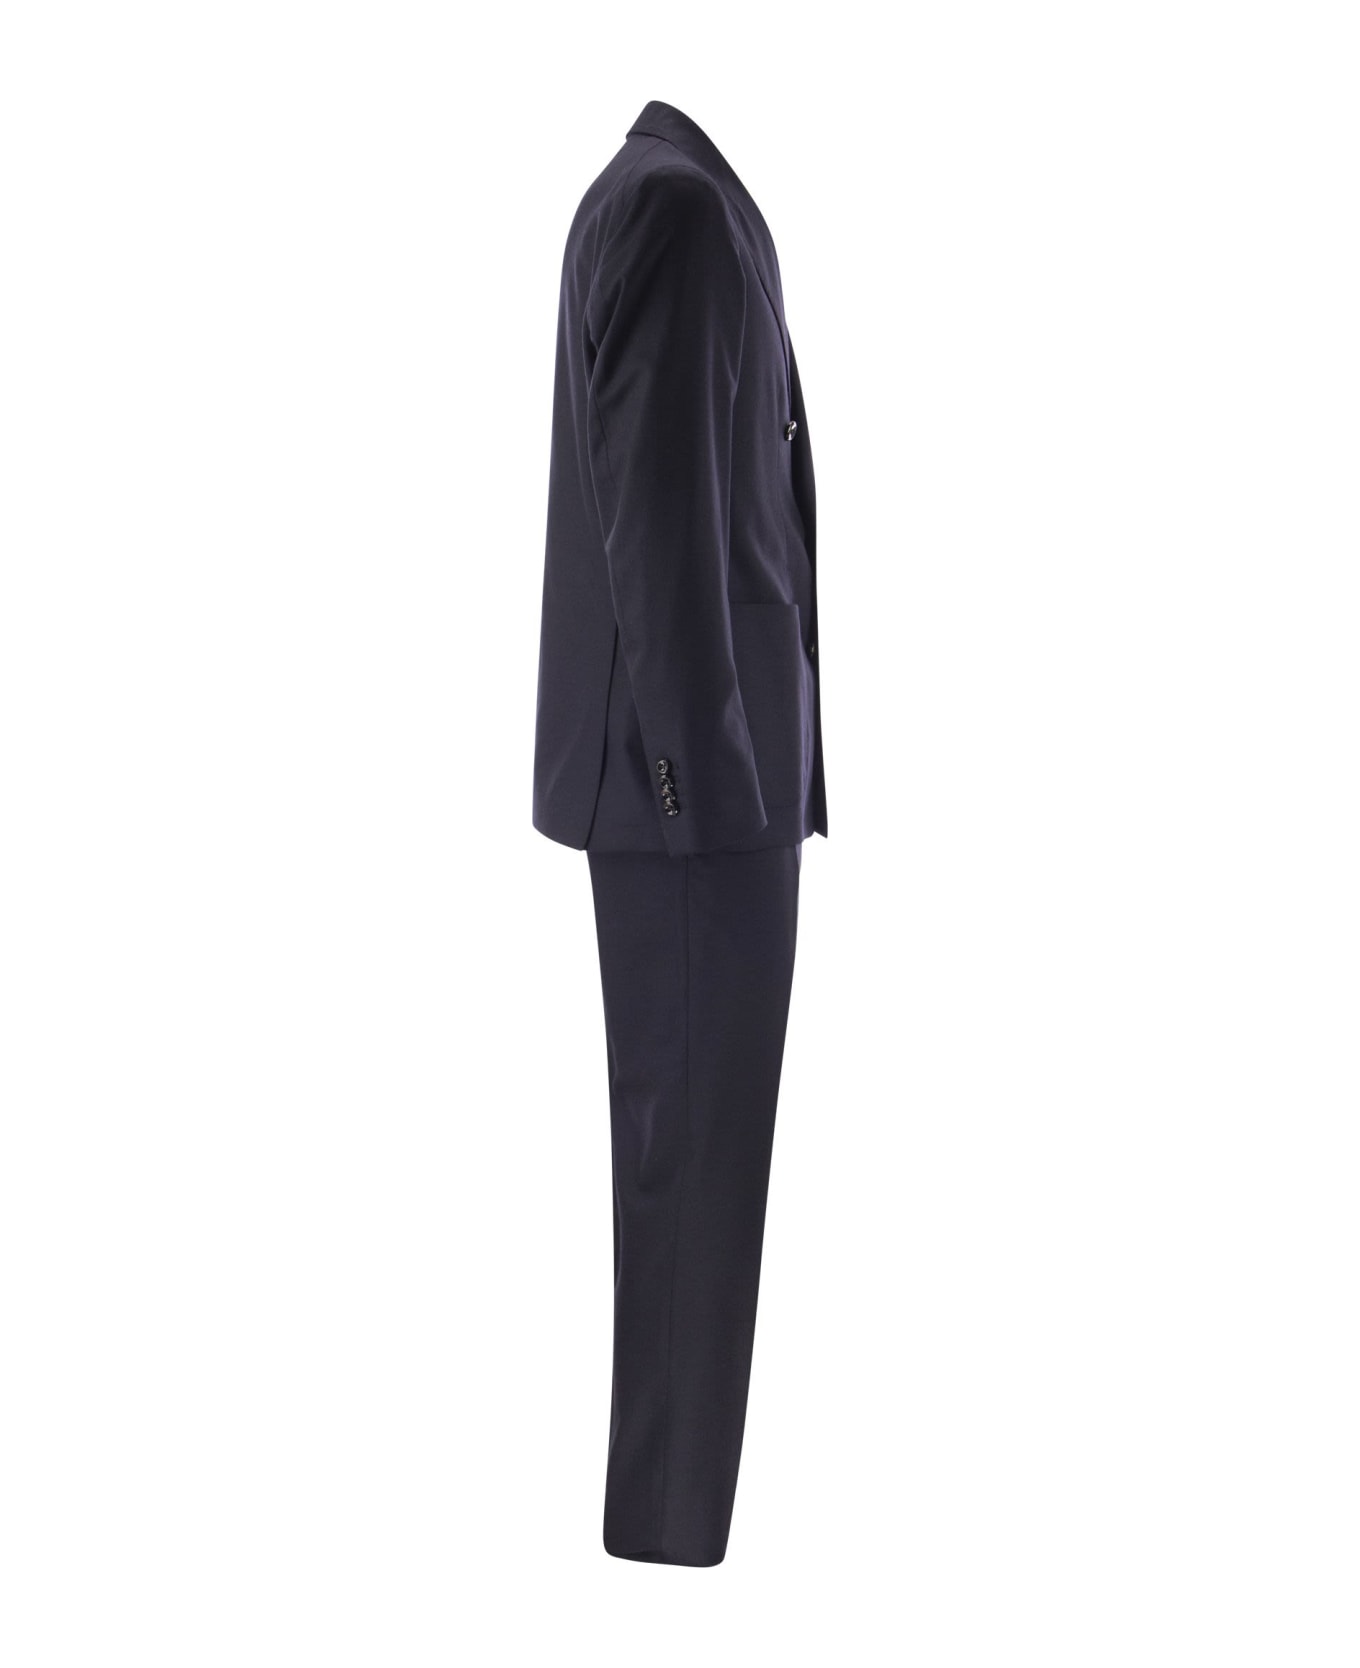 Tagliatore Suit In Wool And Cashmere - Blue